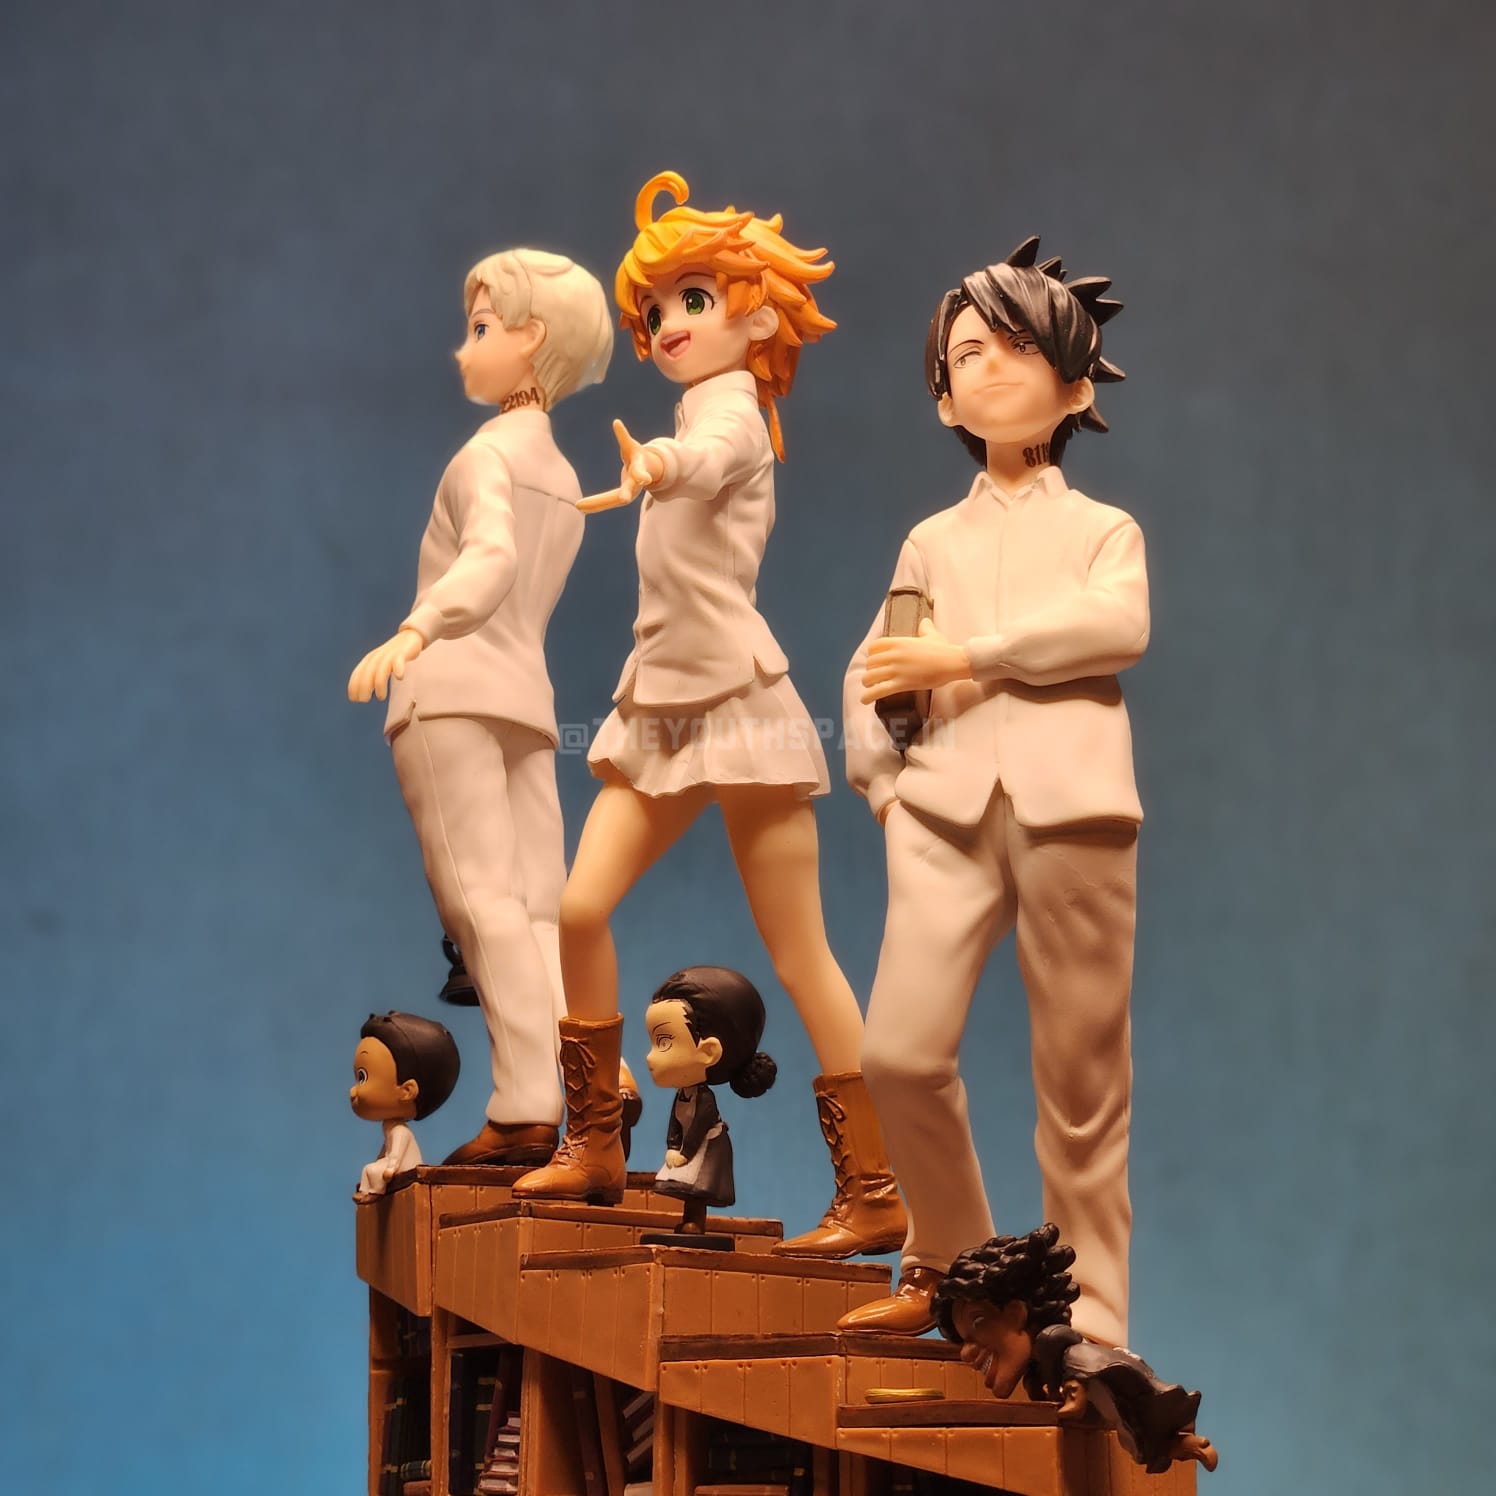 Aniplex of America Acquires The Promised Neverland Anime - Anime